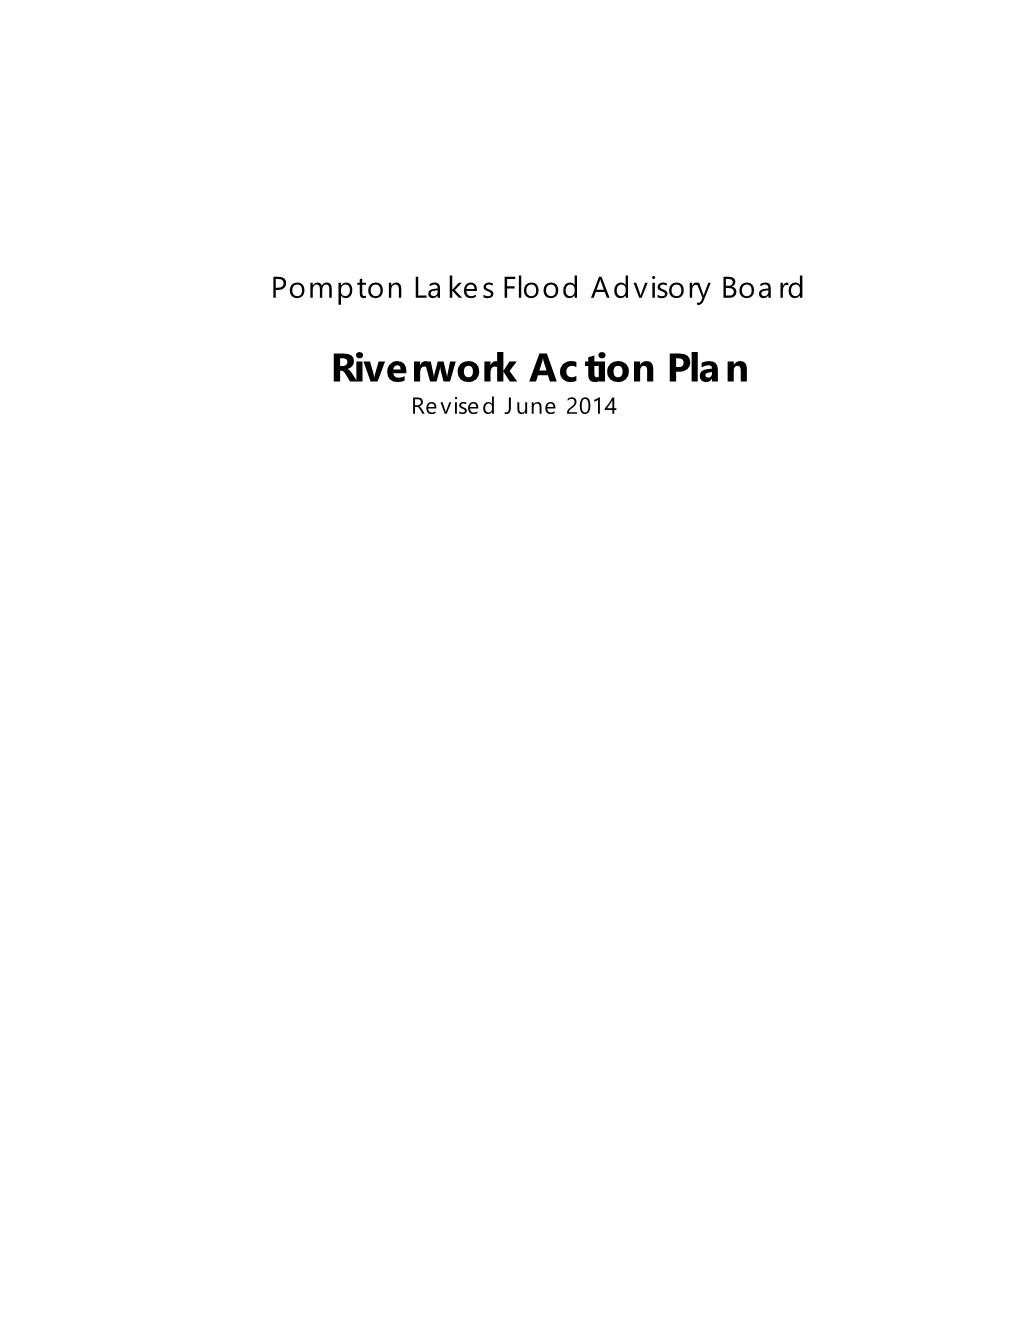 Riverwork Action Plan Revised June 2014 PLFAB Action Plan June 2014 Page 2 of 8